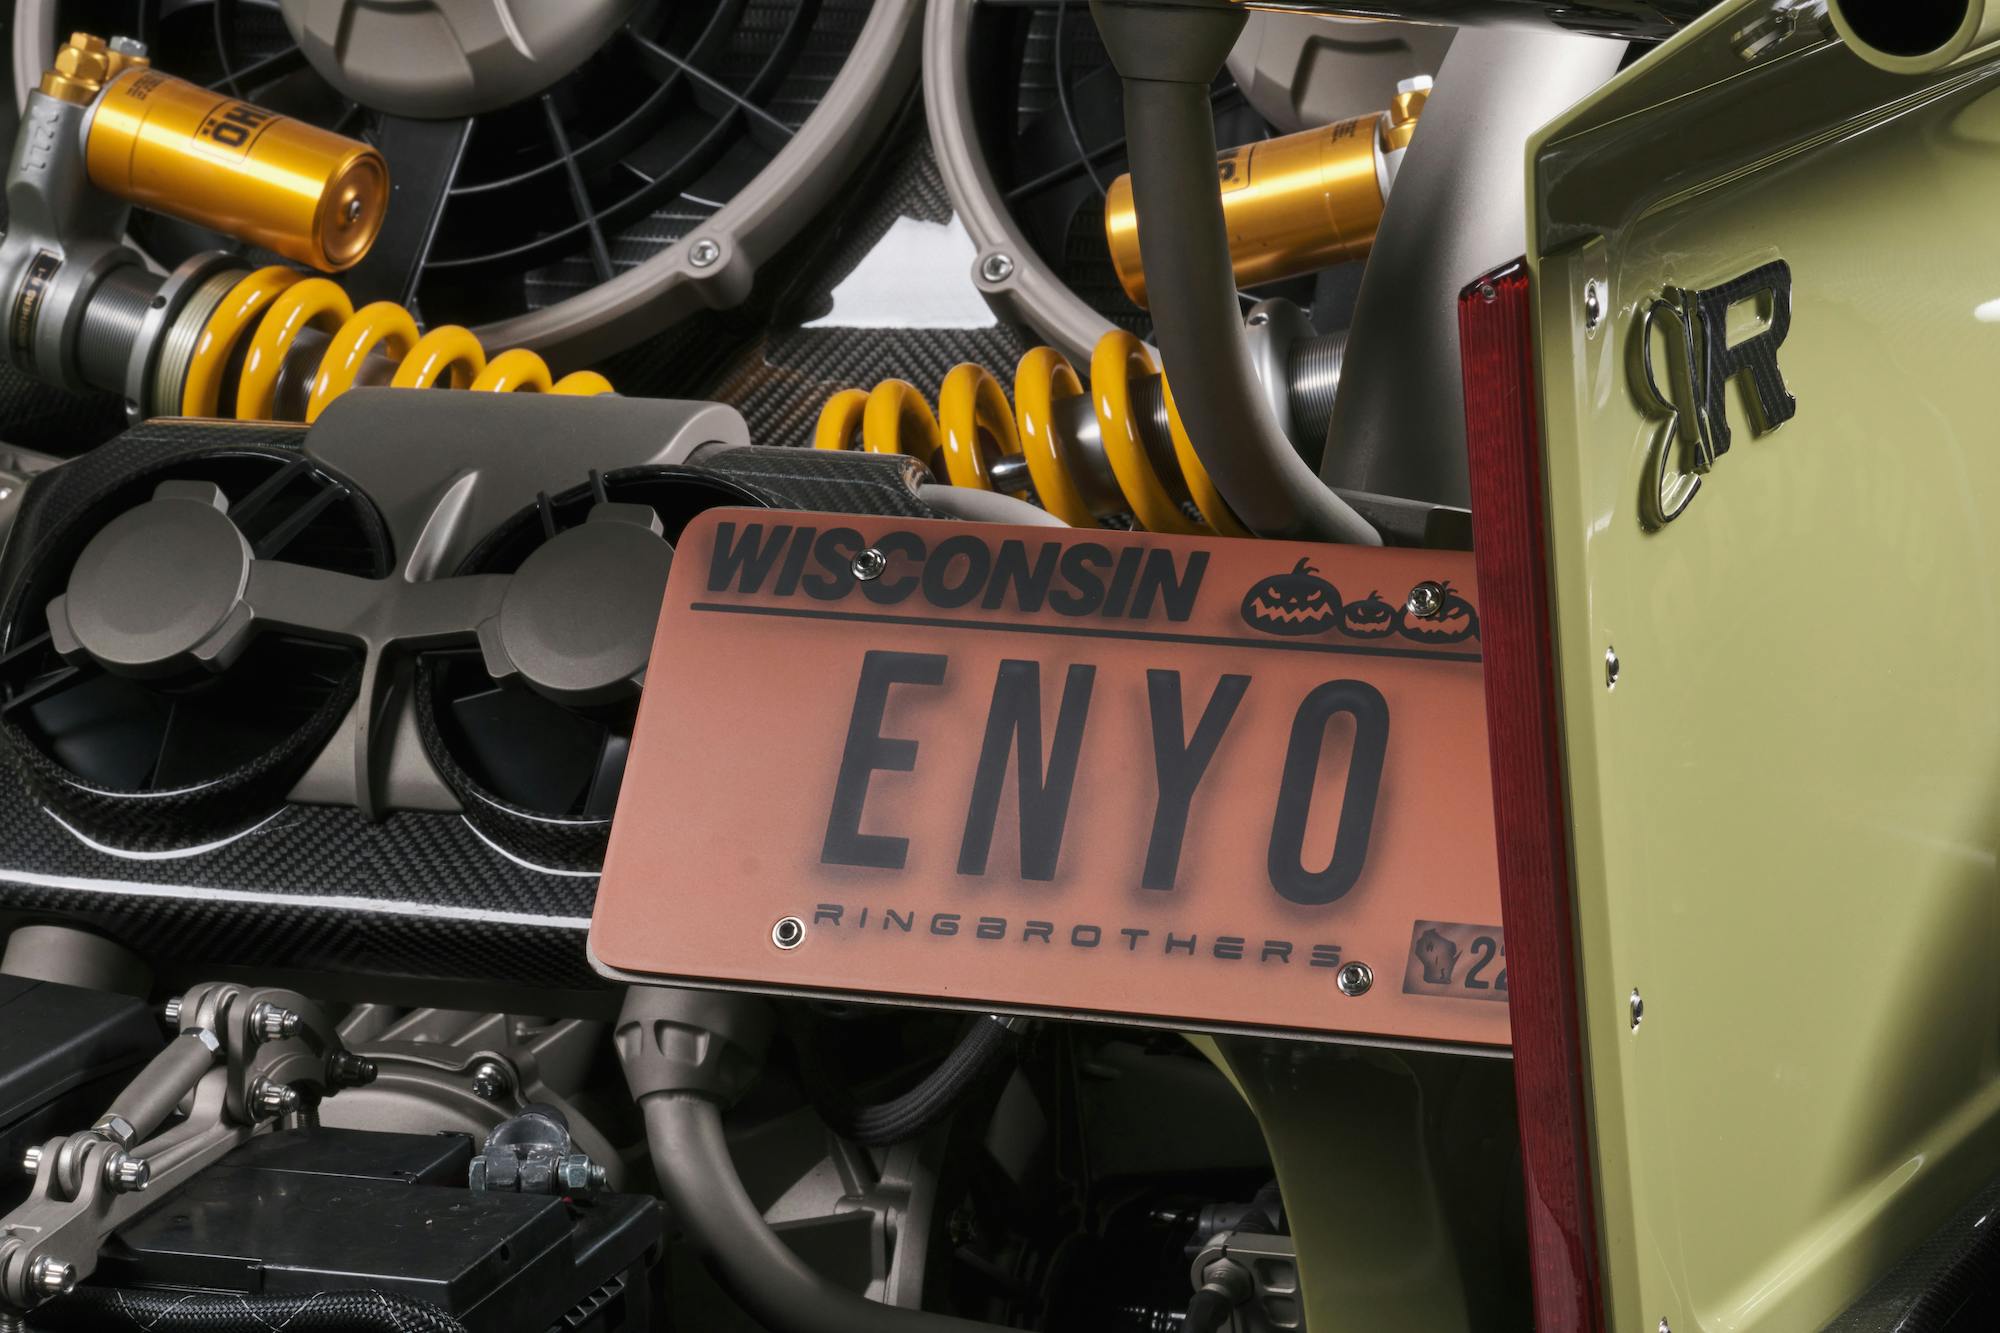 Enyo 1948 Chevy Super Truck plate